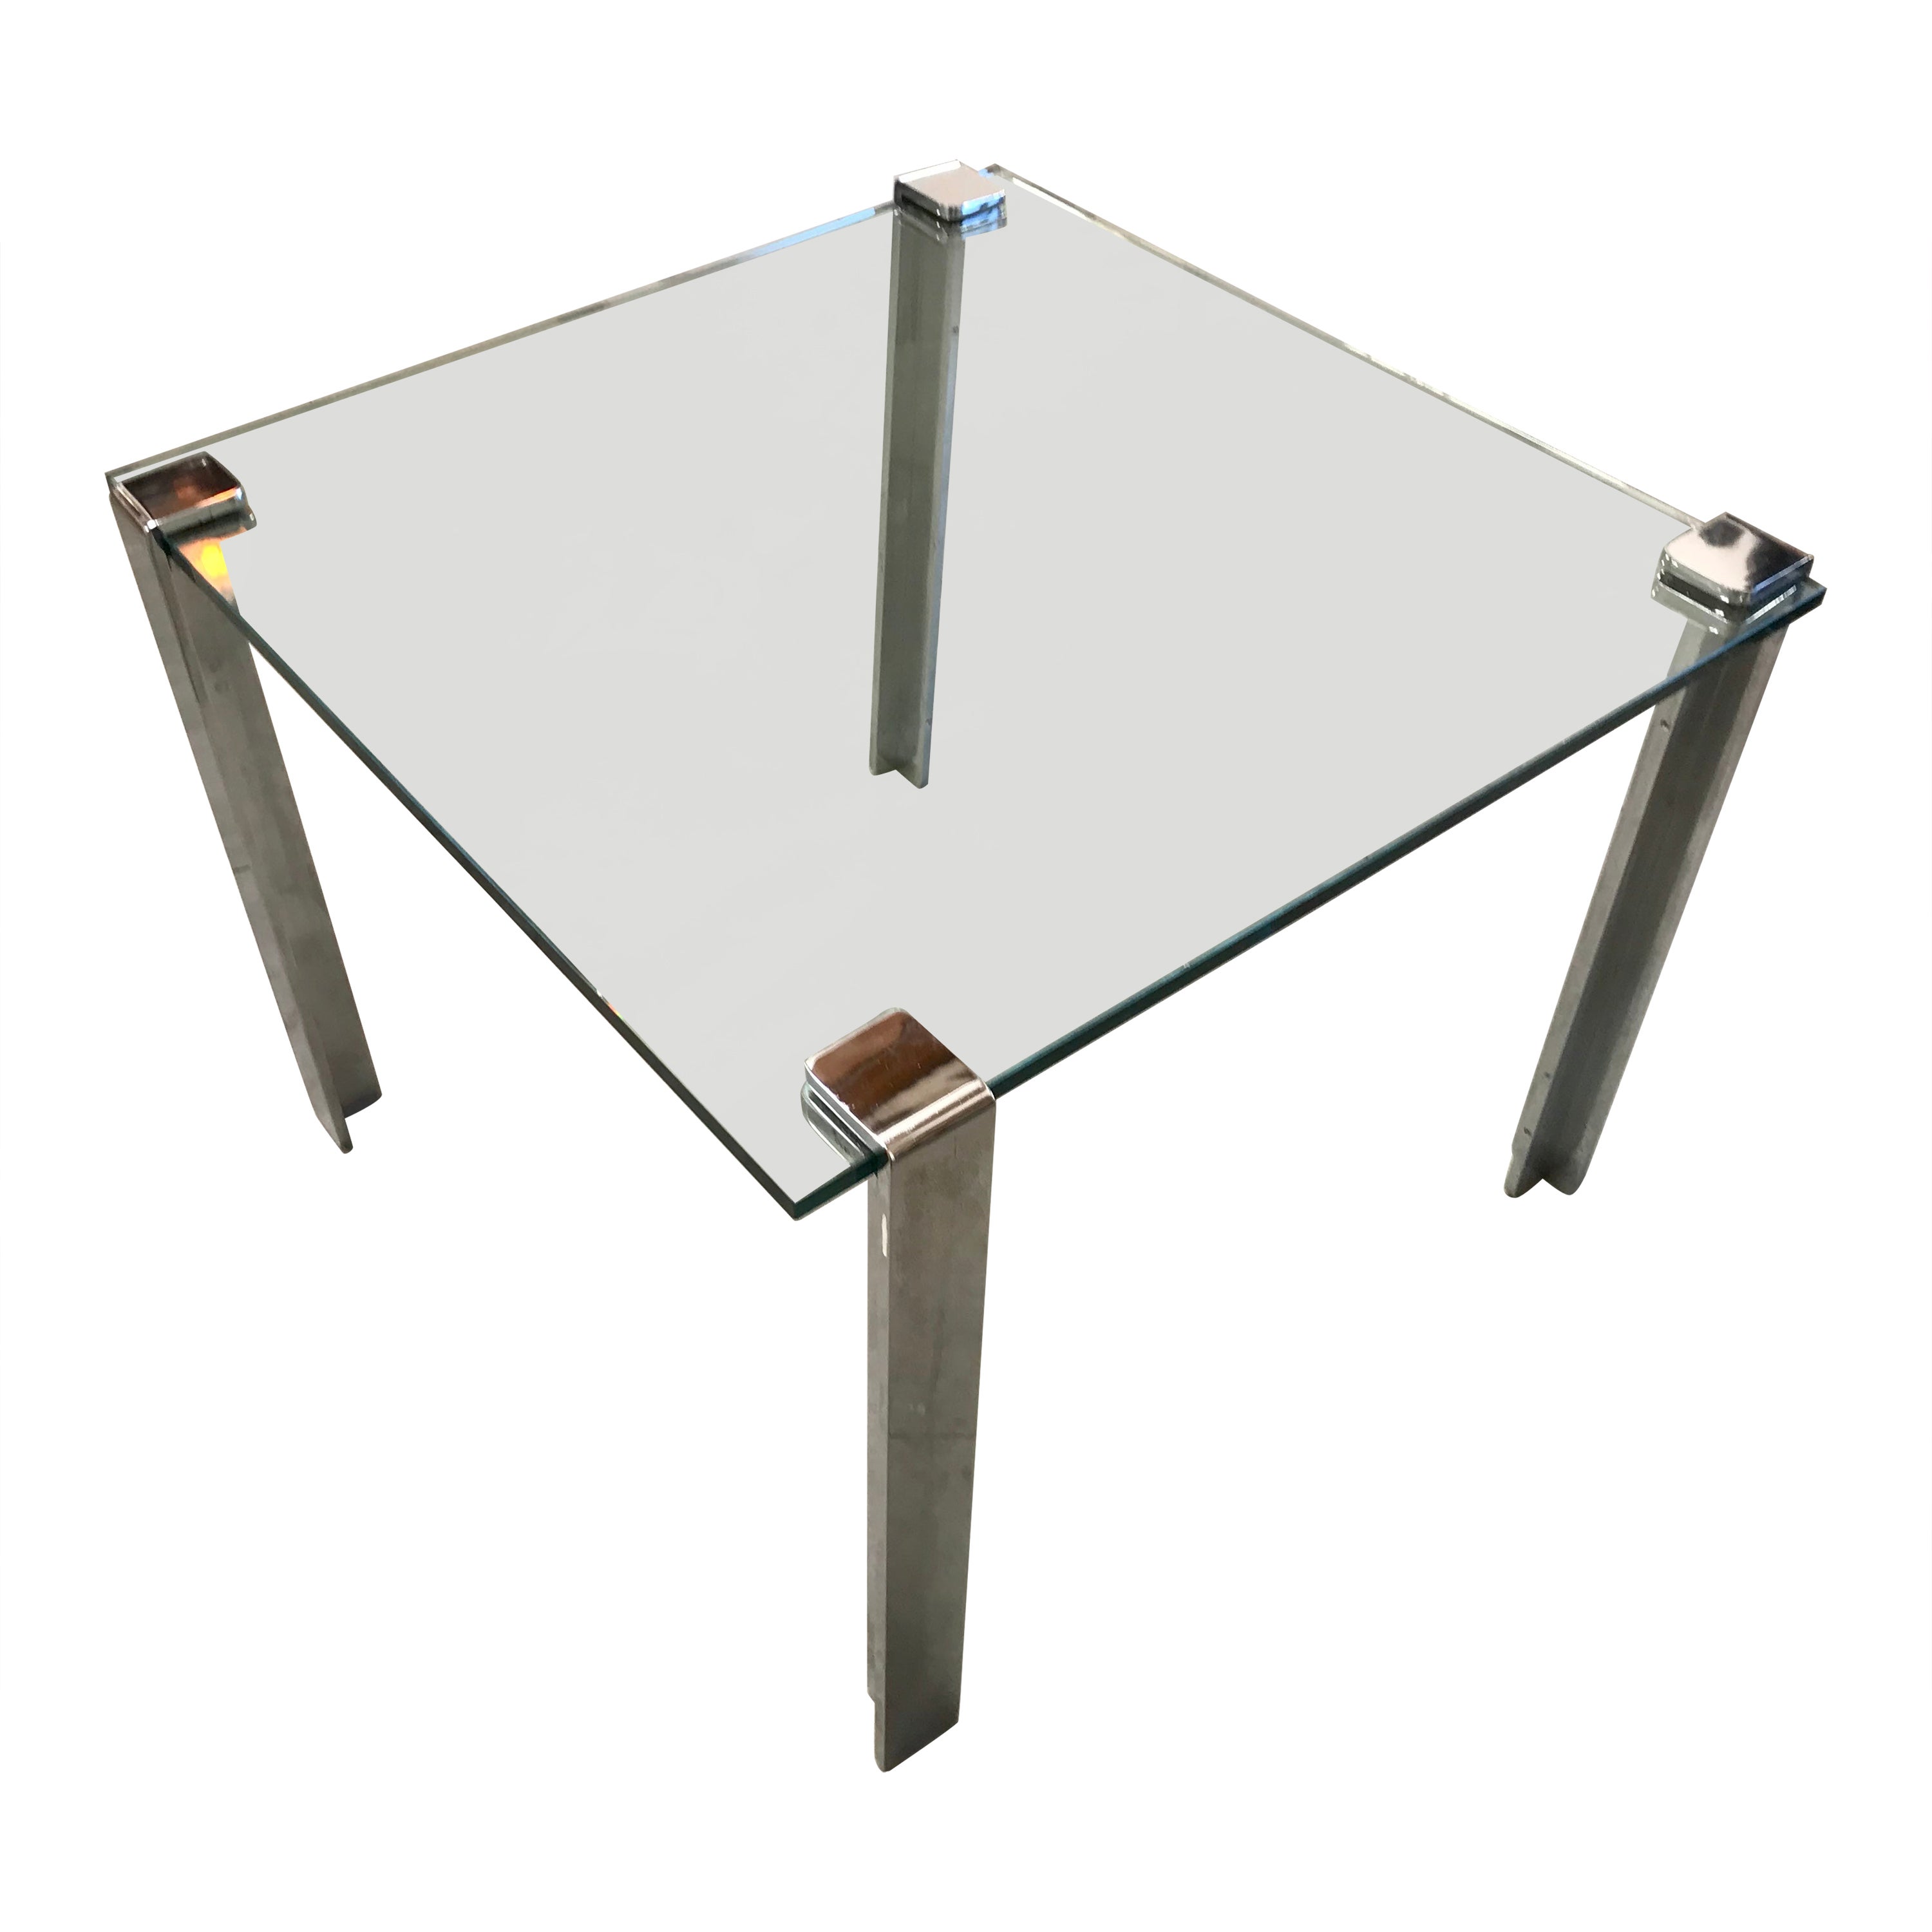 Gerald McCabe 'Clamp' Base Dinette Table